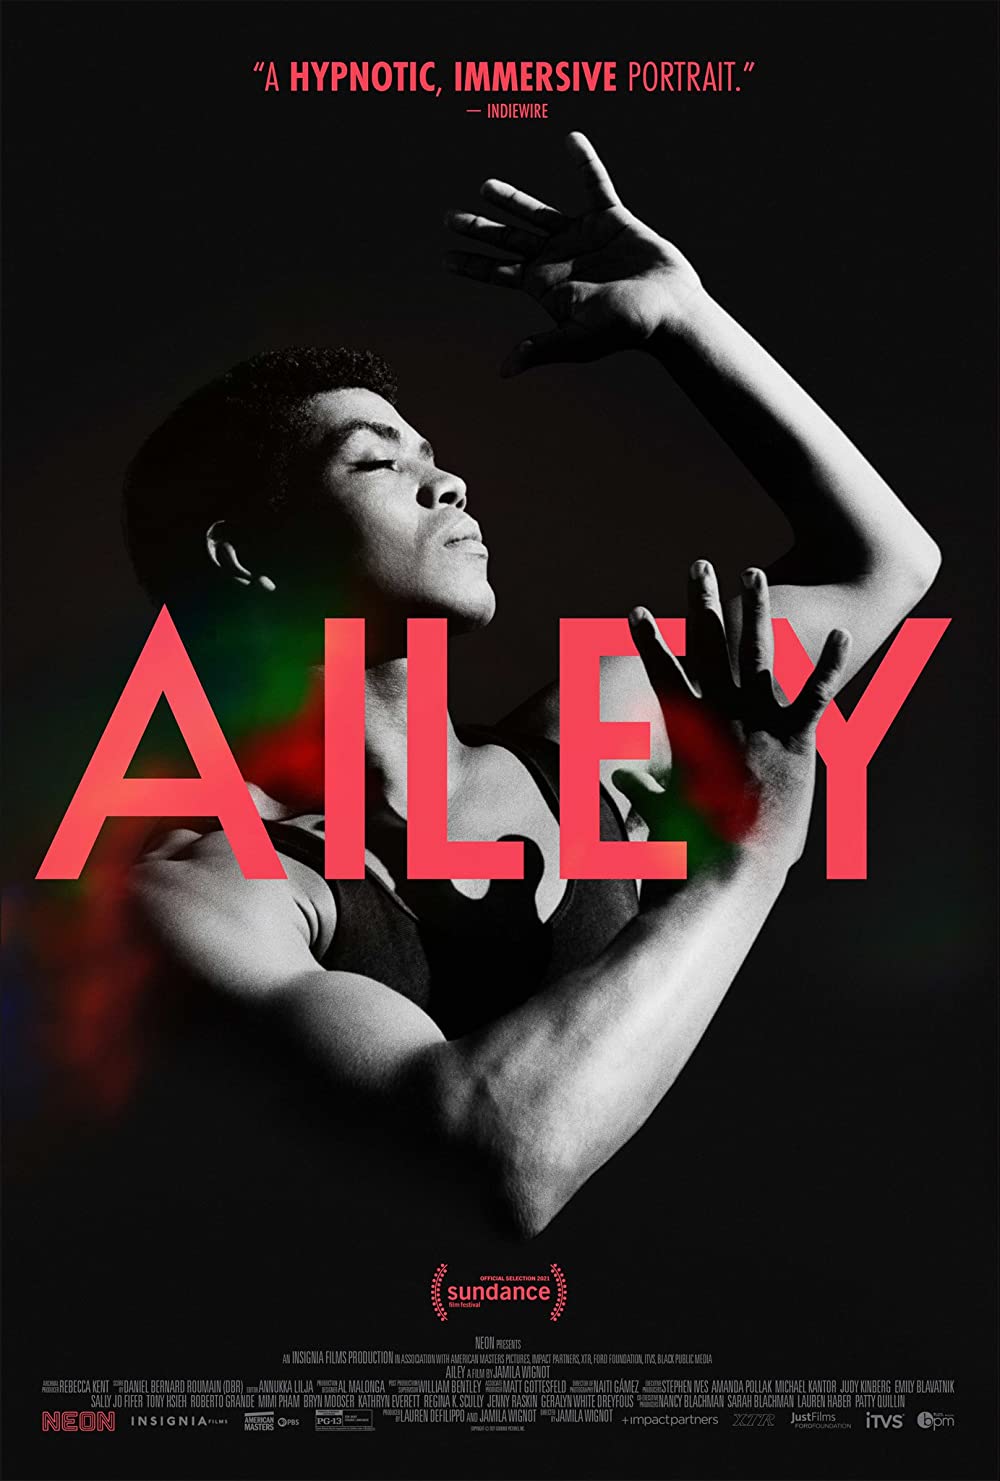 Moss Arts Center and The Lyric Theatre present “American Masters: Ailey”